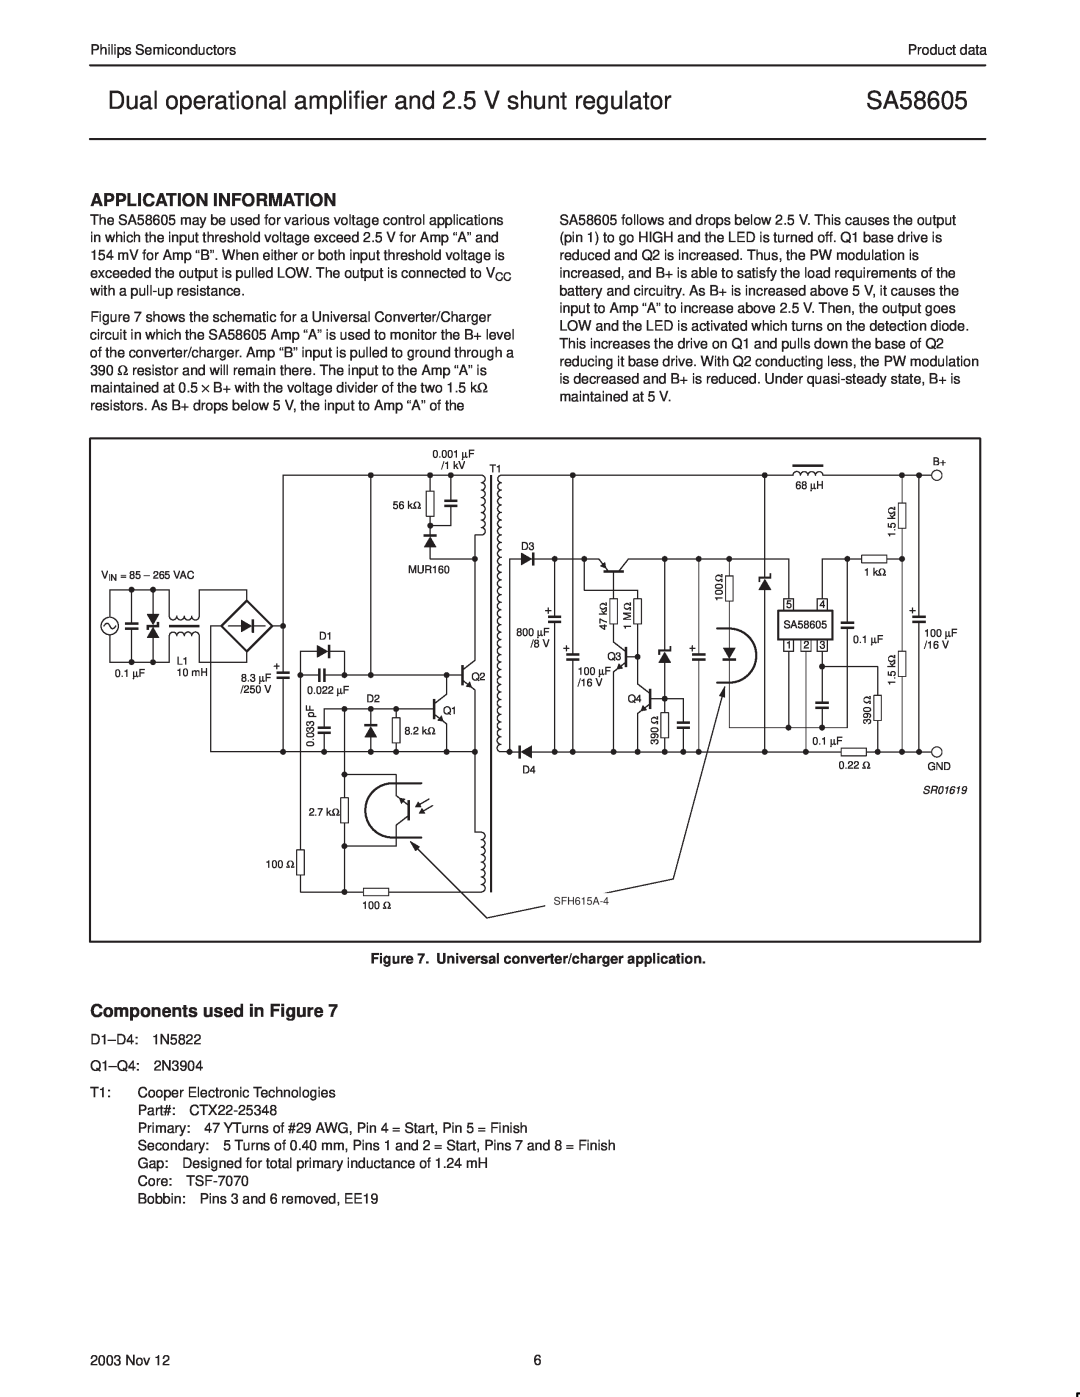 Philips SA58605 manual Application Information, Components used in Figure, Universal converter/charger application 